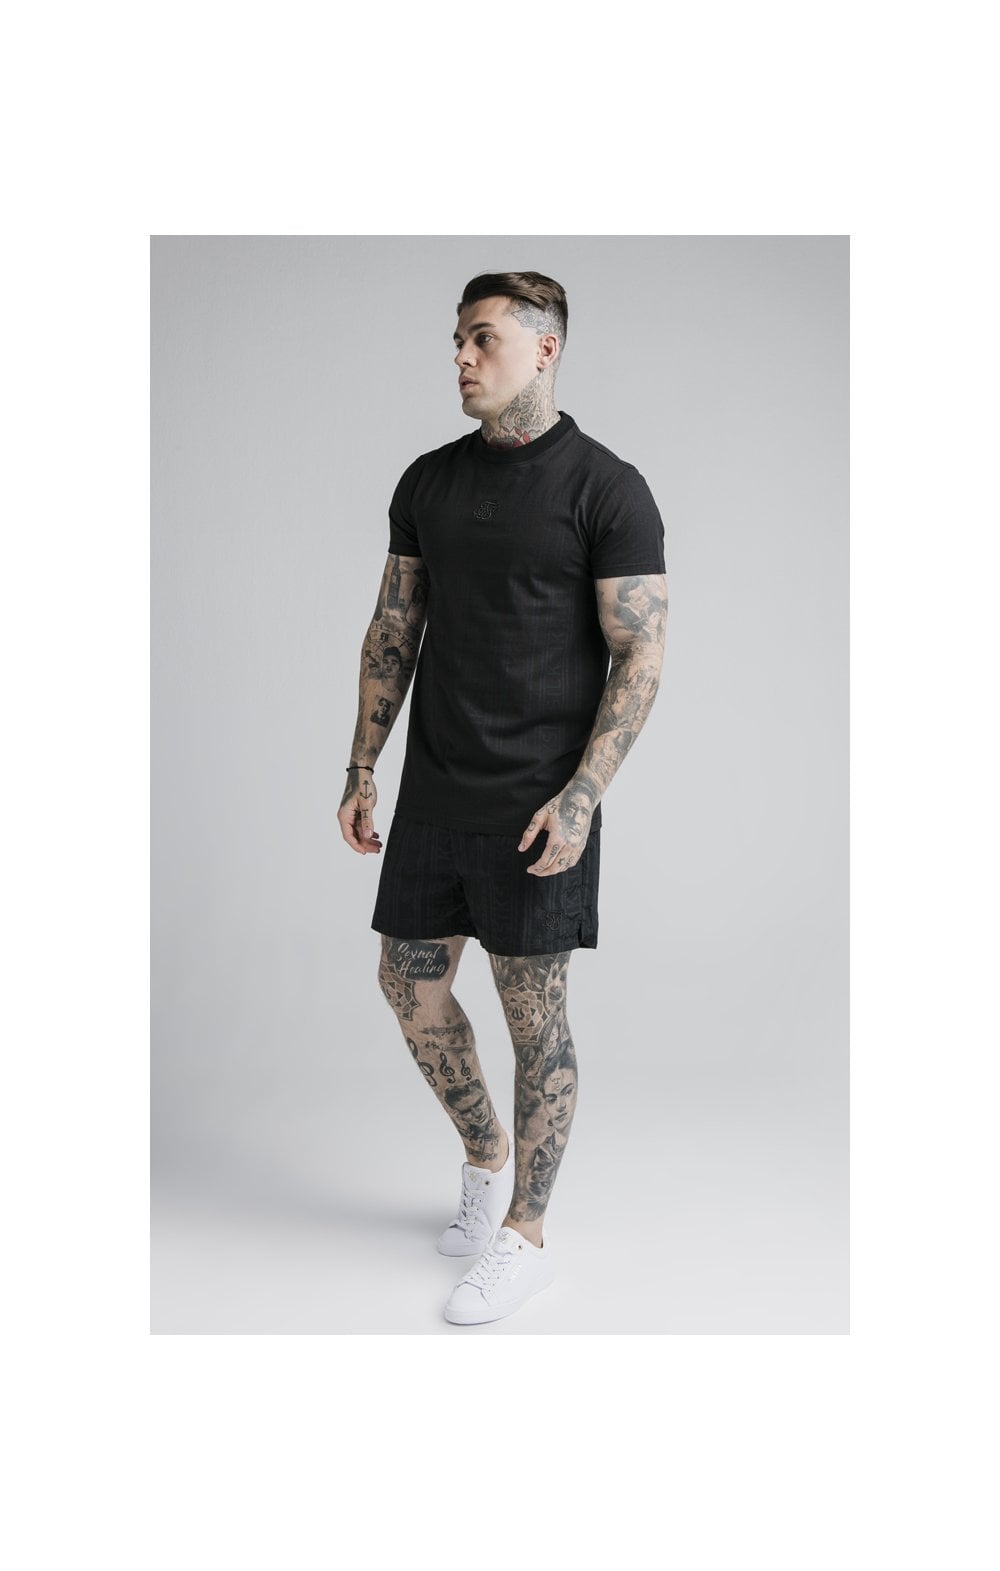 SikSilk S/S Fitted Box Tee - Black & Grey (2)